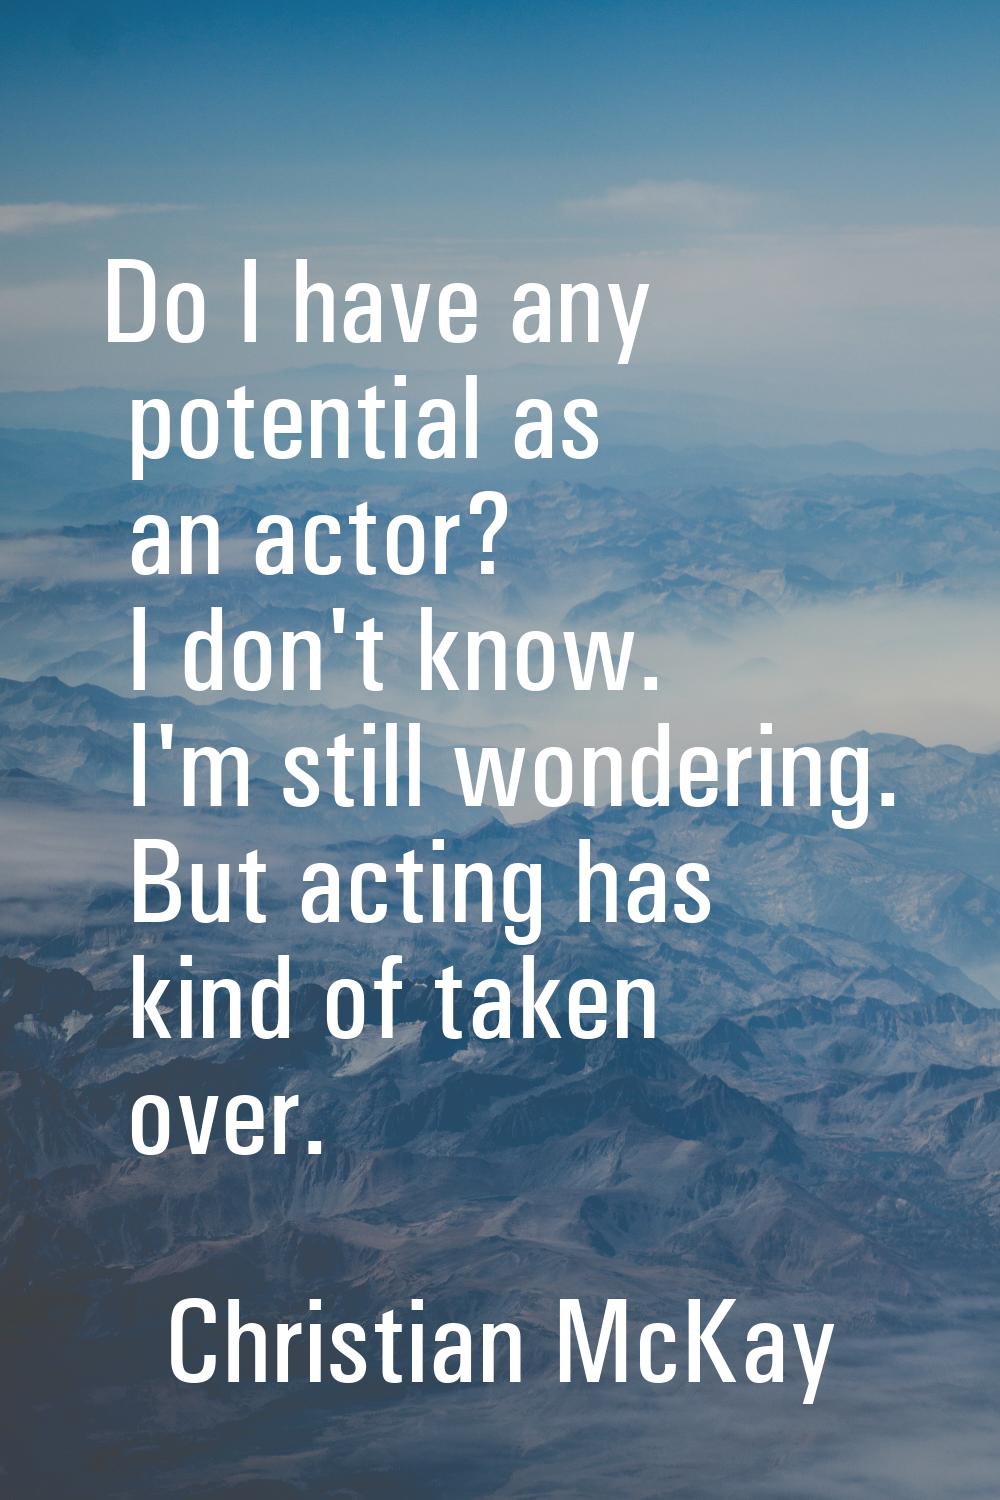 Do I have any potential as an actor? I don't know. I'm still wondering. But acting has kind of take